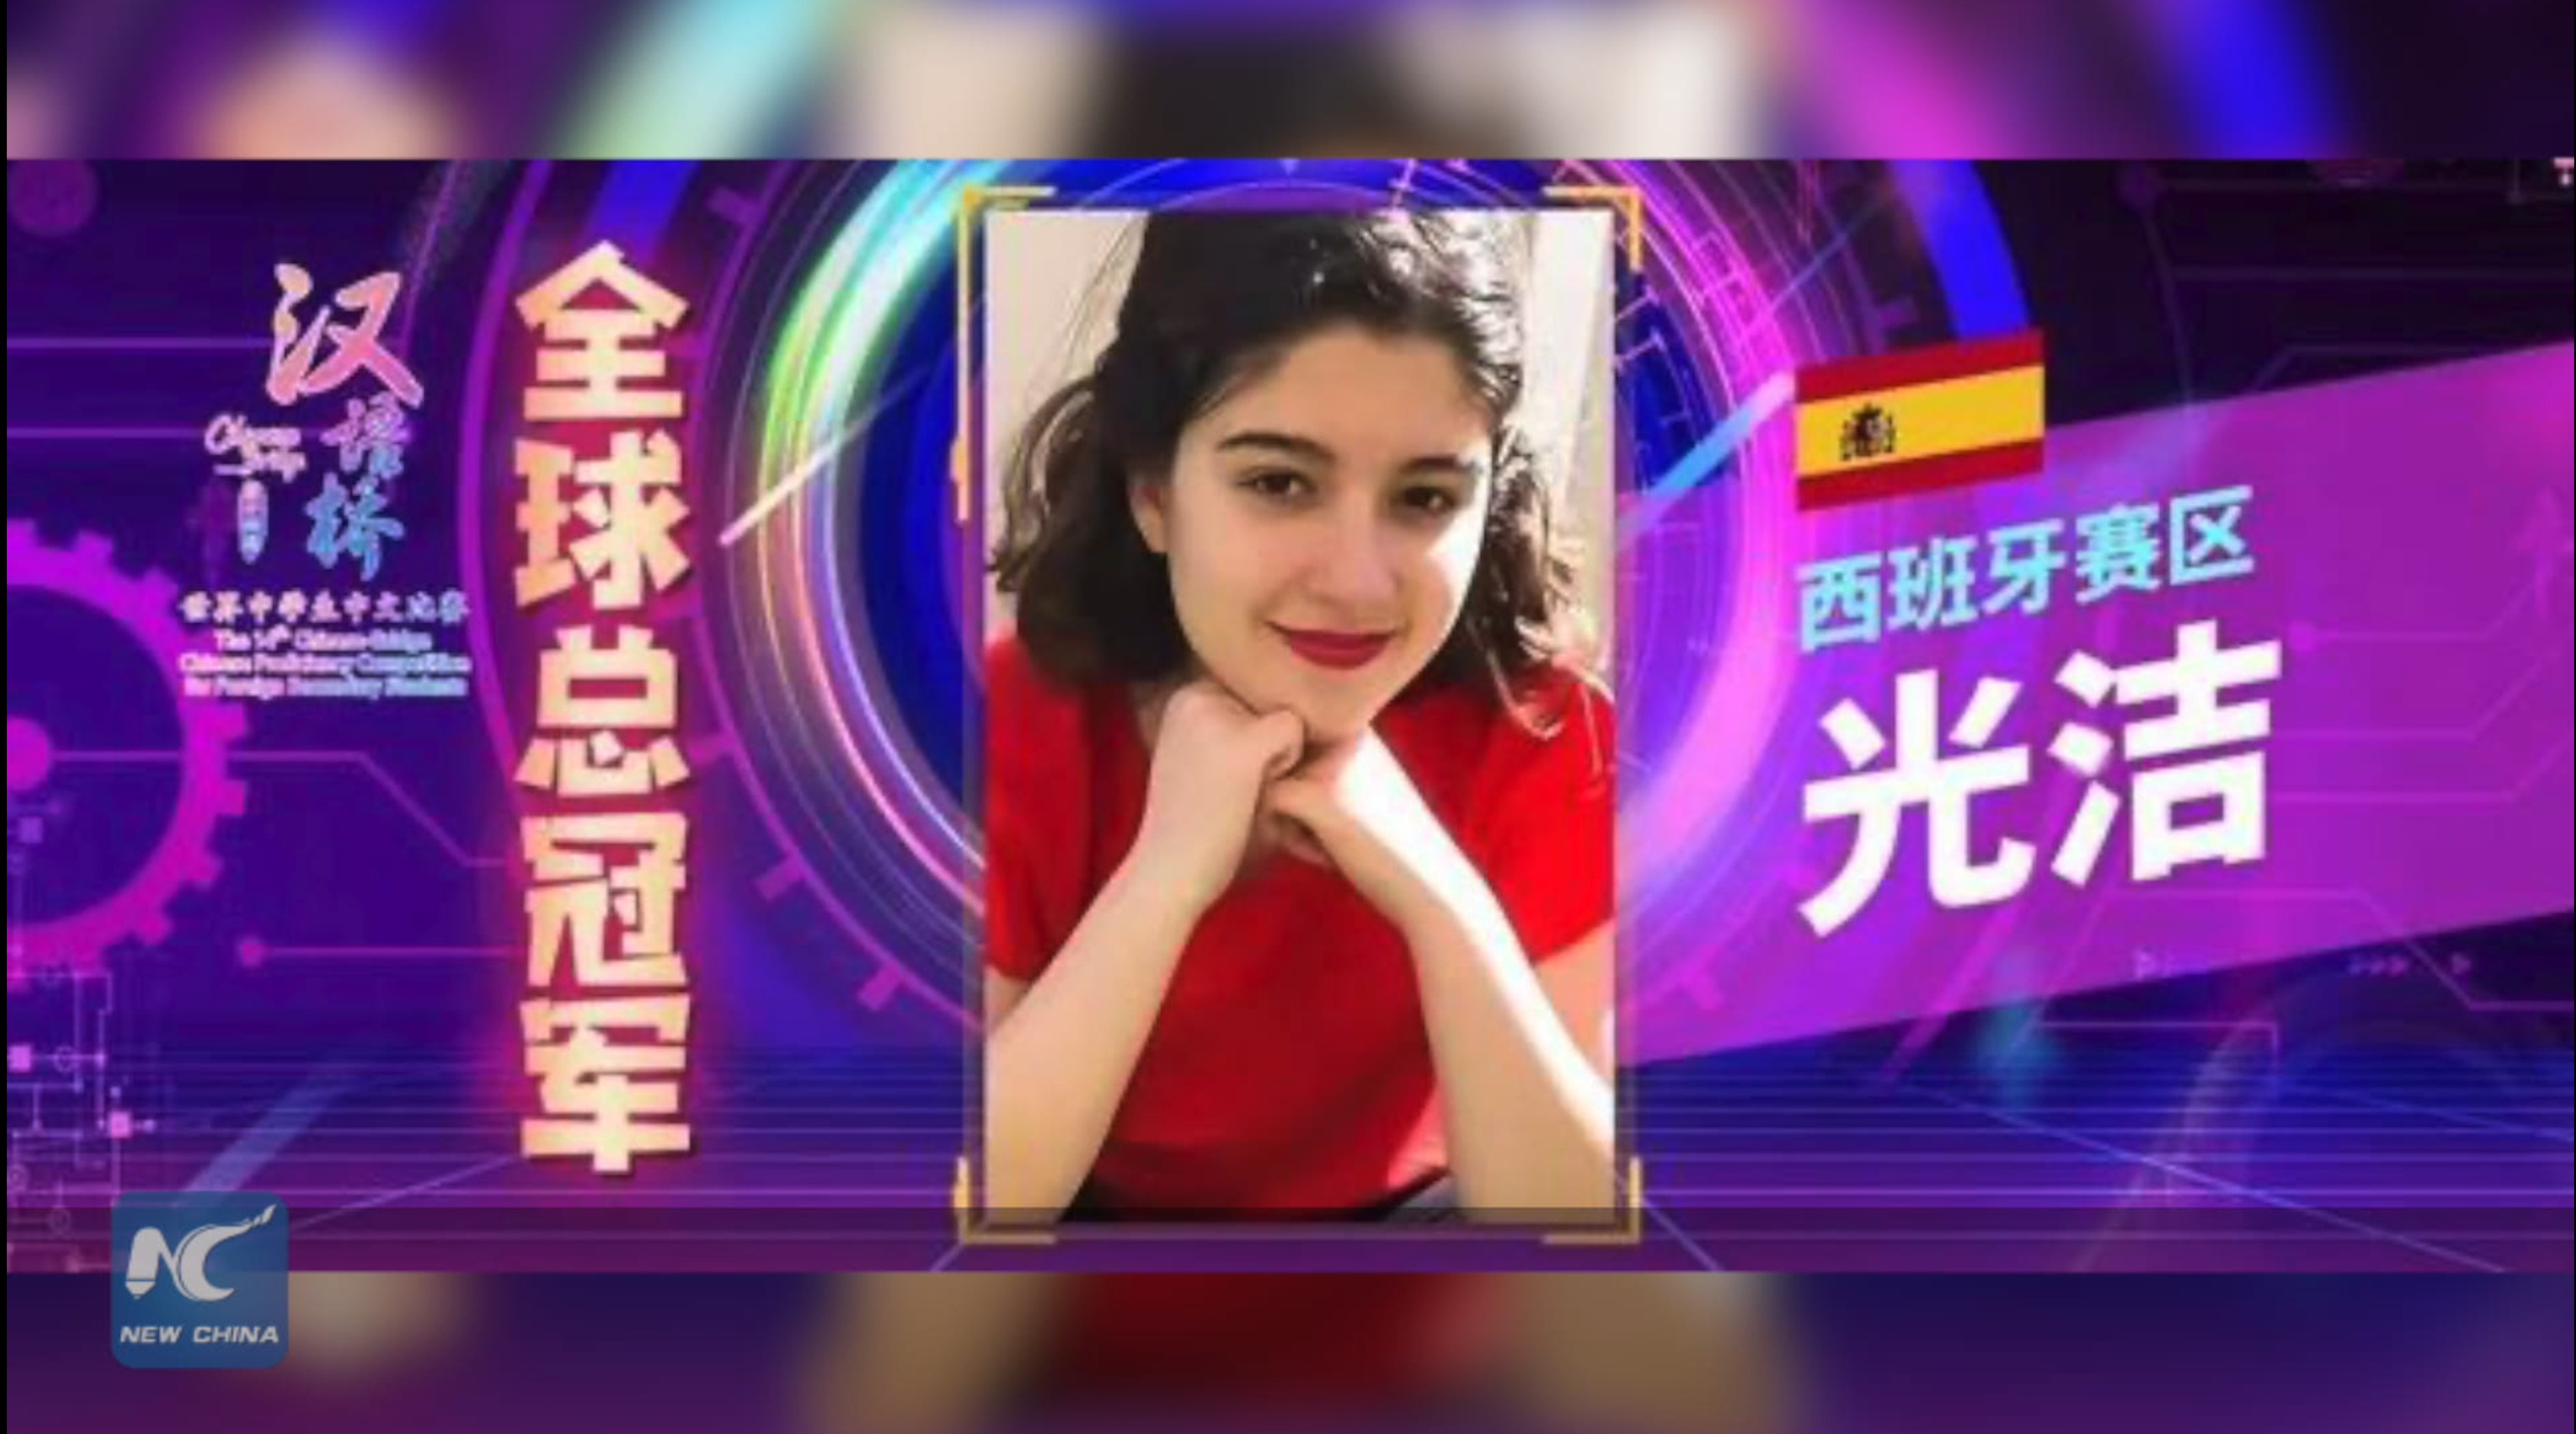 Spanish girl wins global championship in Chinese Bridge competition